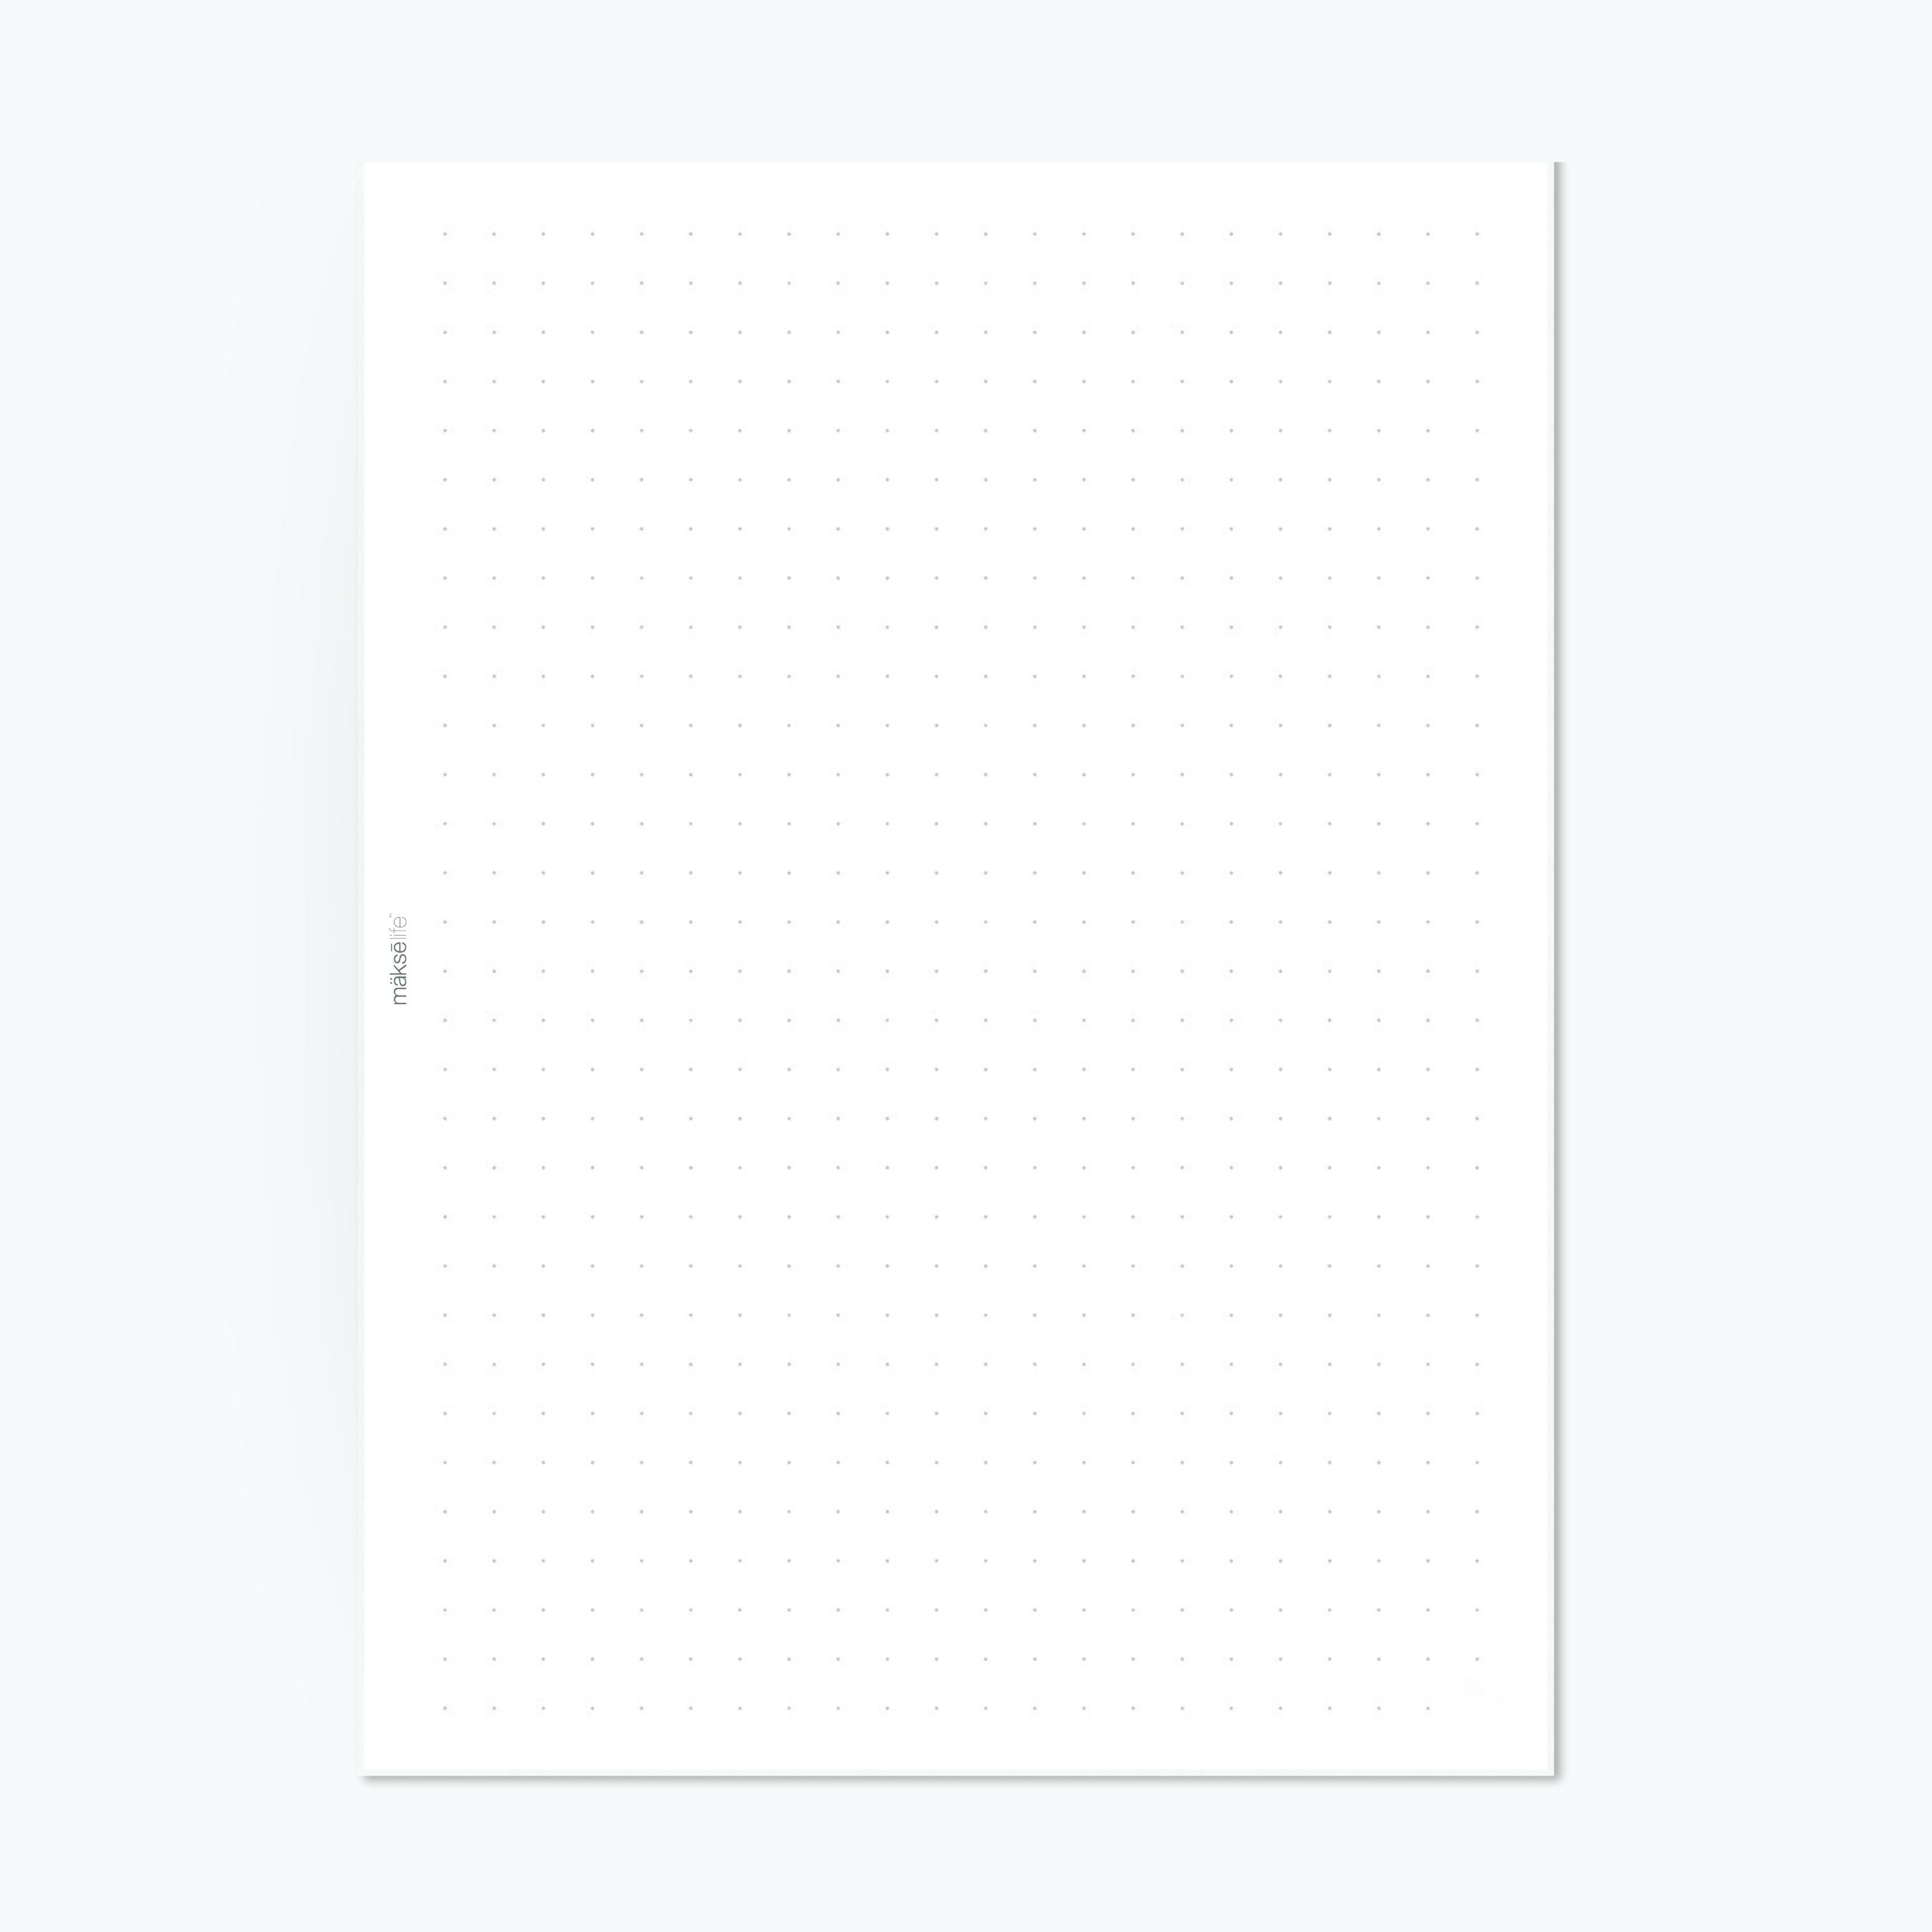 Dot Grid/Lined Standard Wide Inserts – Layle By Mail